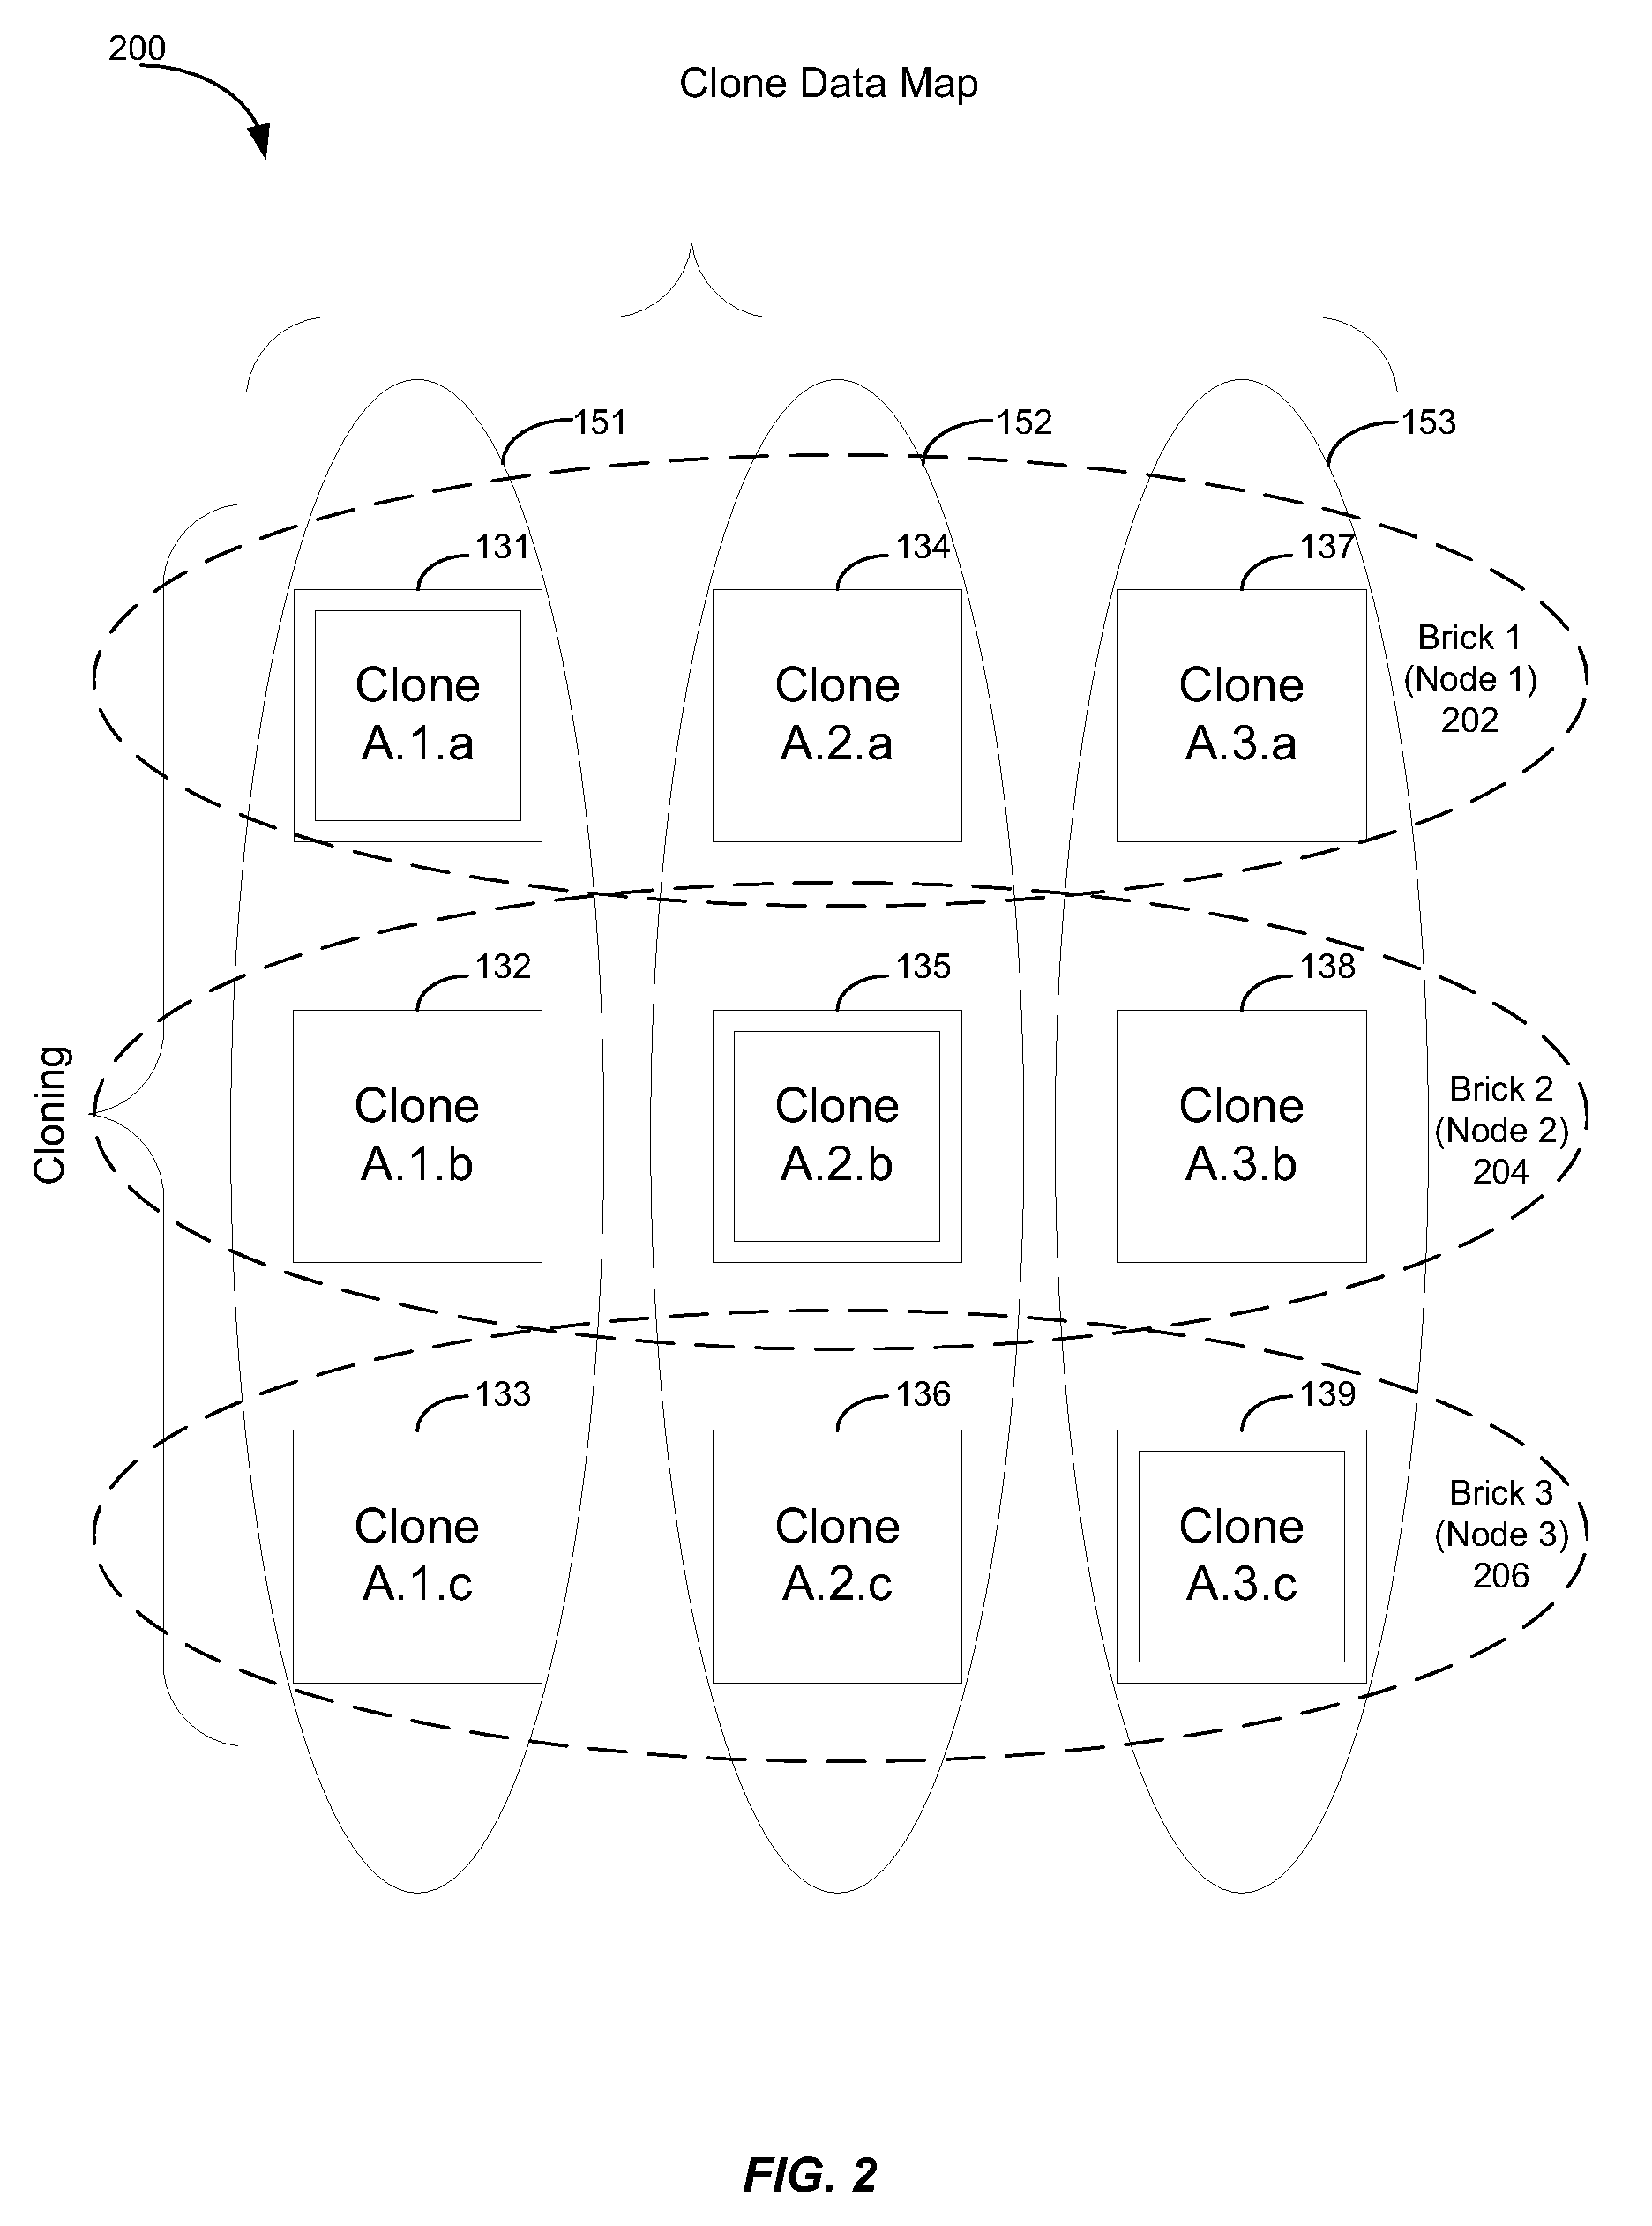 Data placement transparency for high availability and load balancing